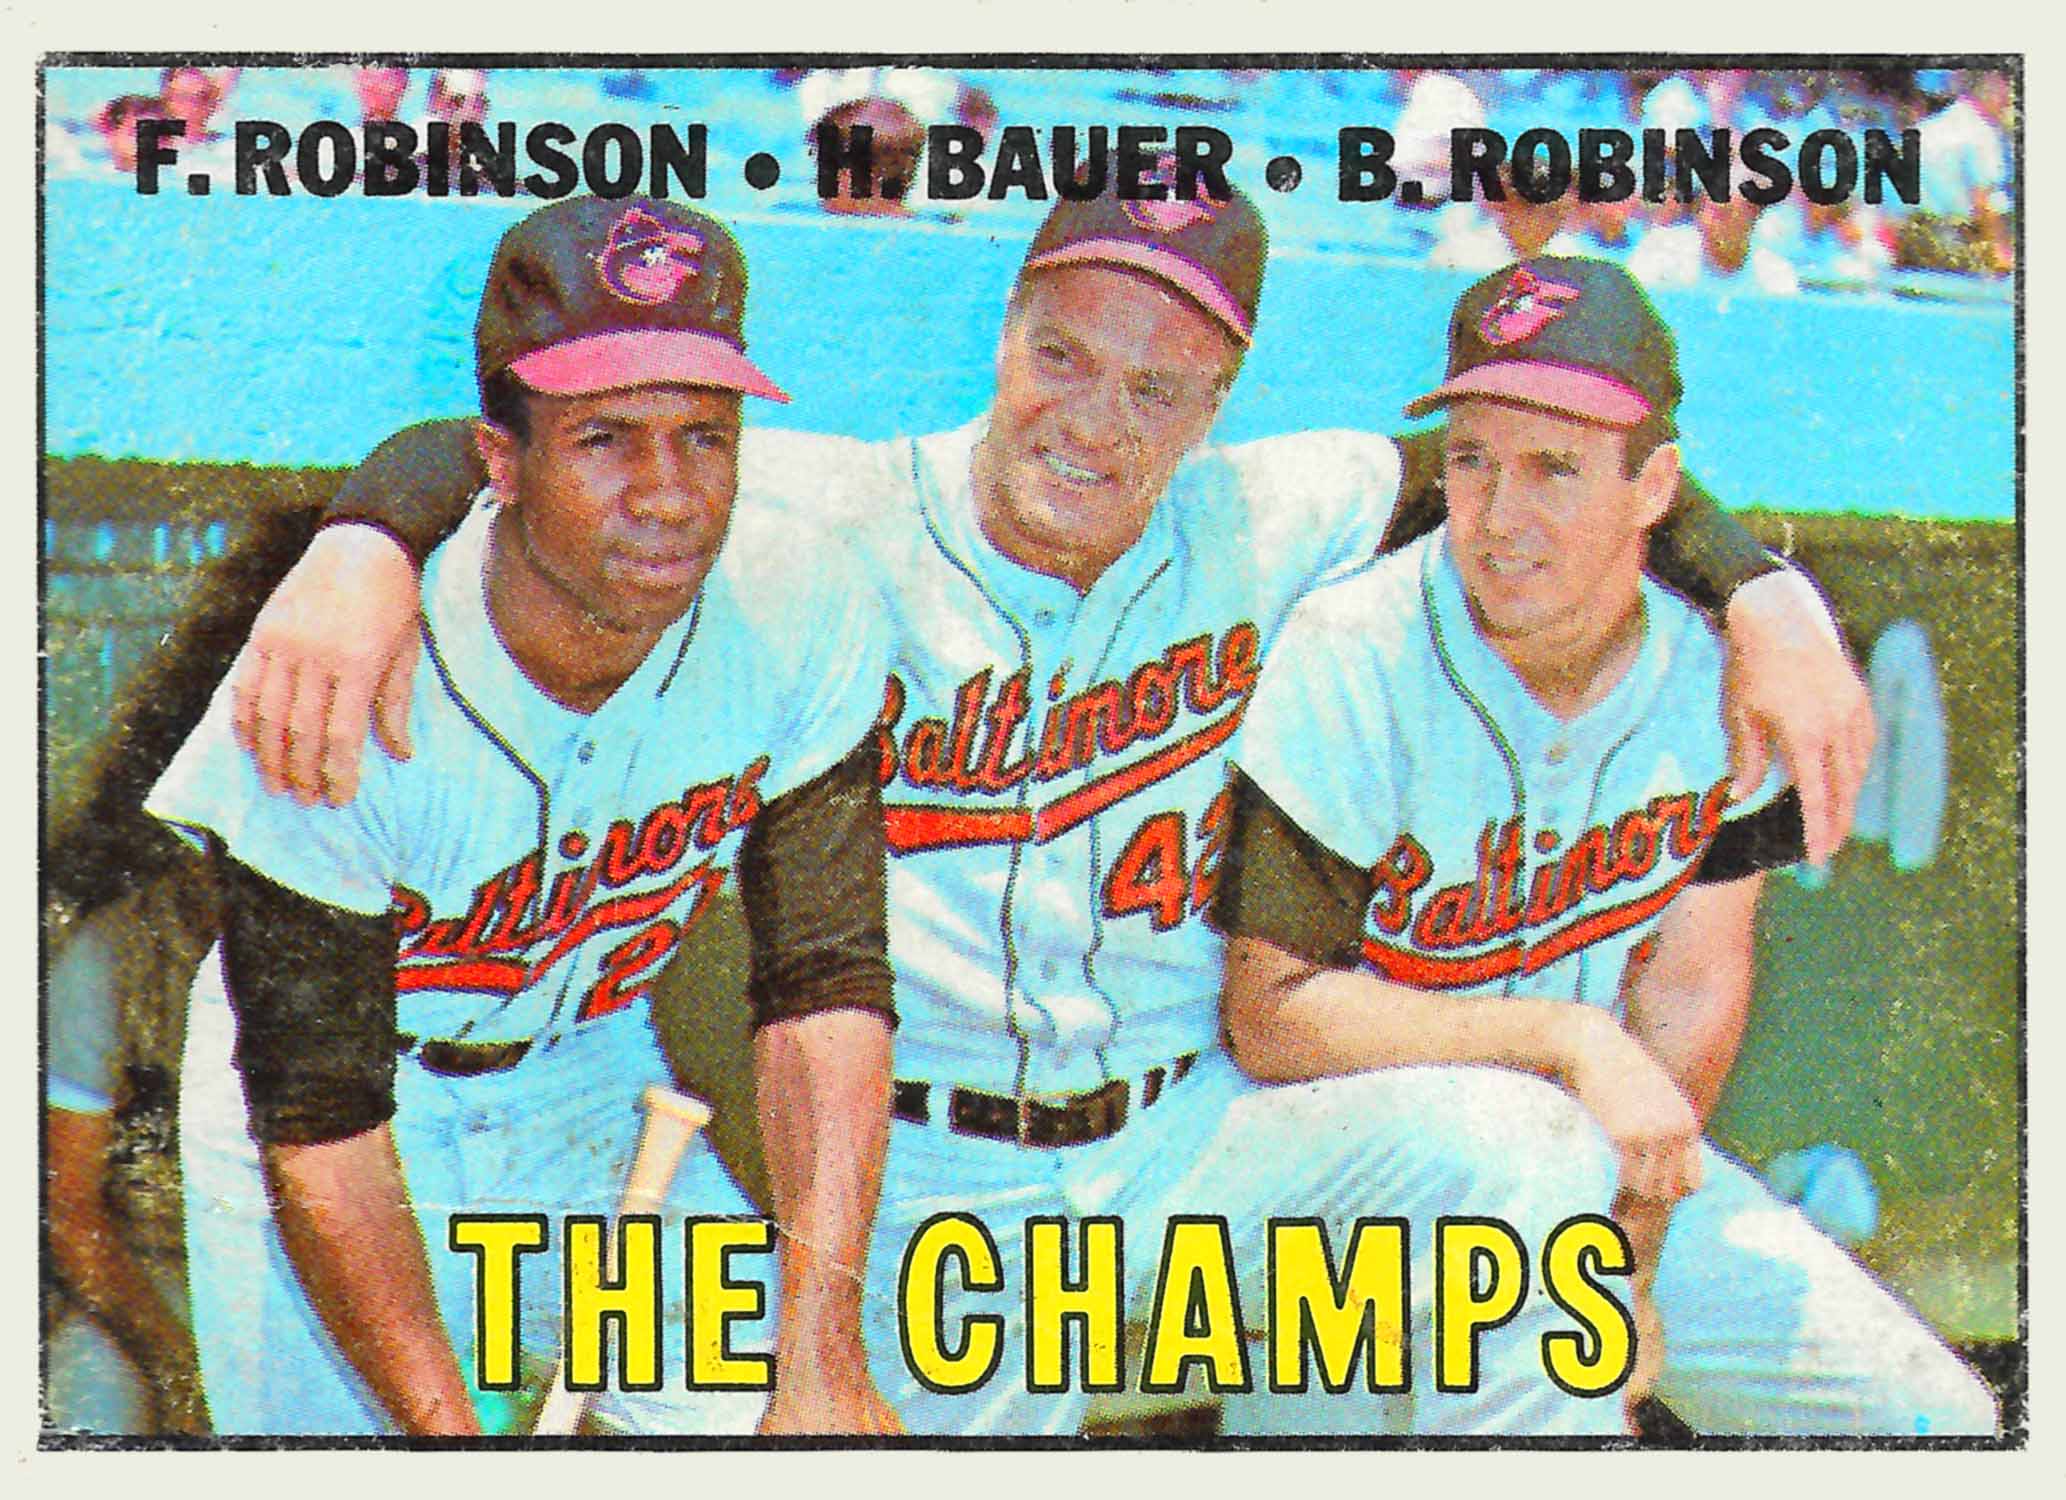 1967 Topps The Champs